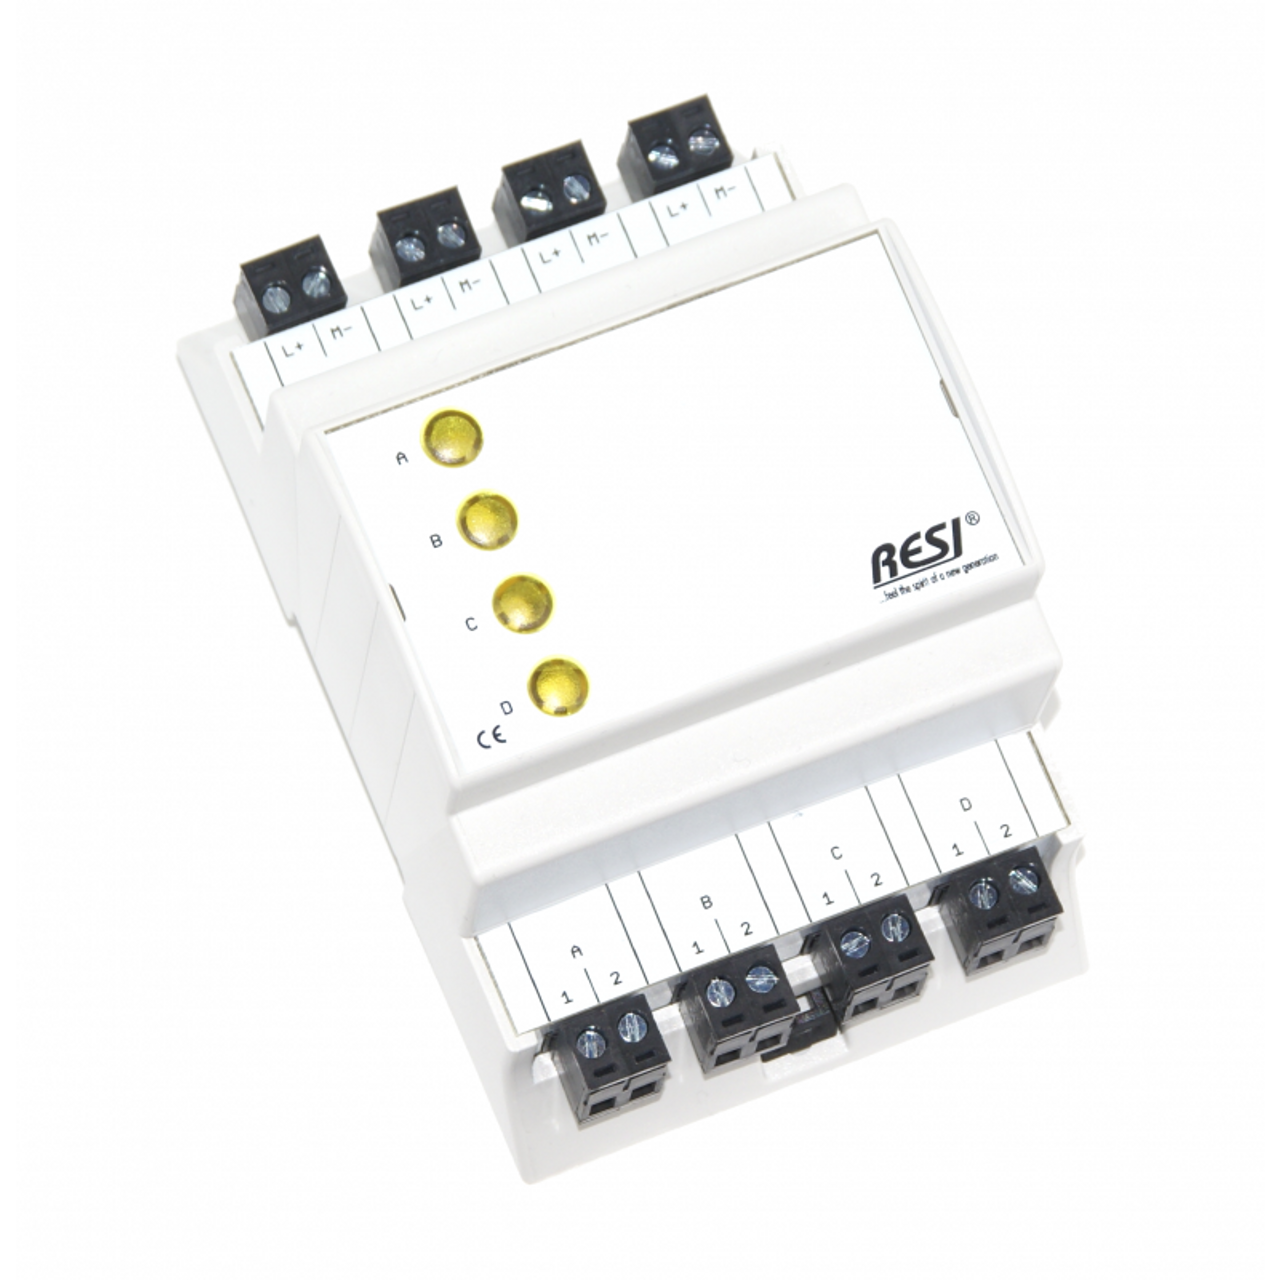 Signal module, DIN ISO16484, VDI 3814 manual operation interface, 4 LEDs in GELB